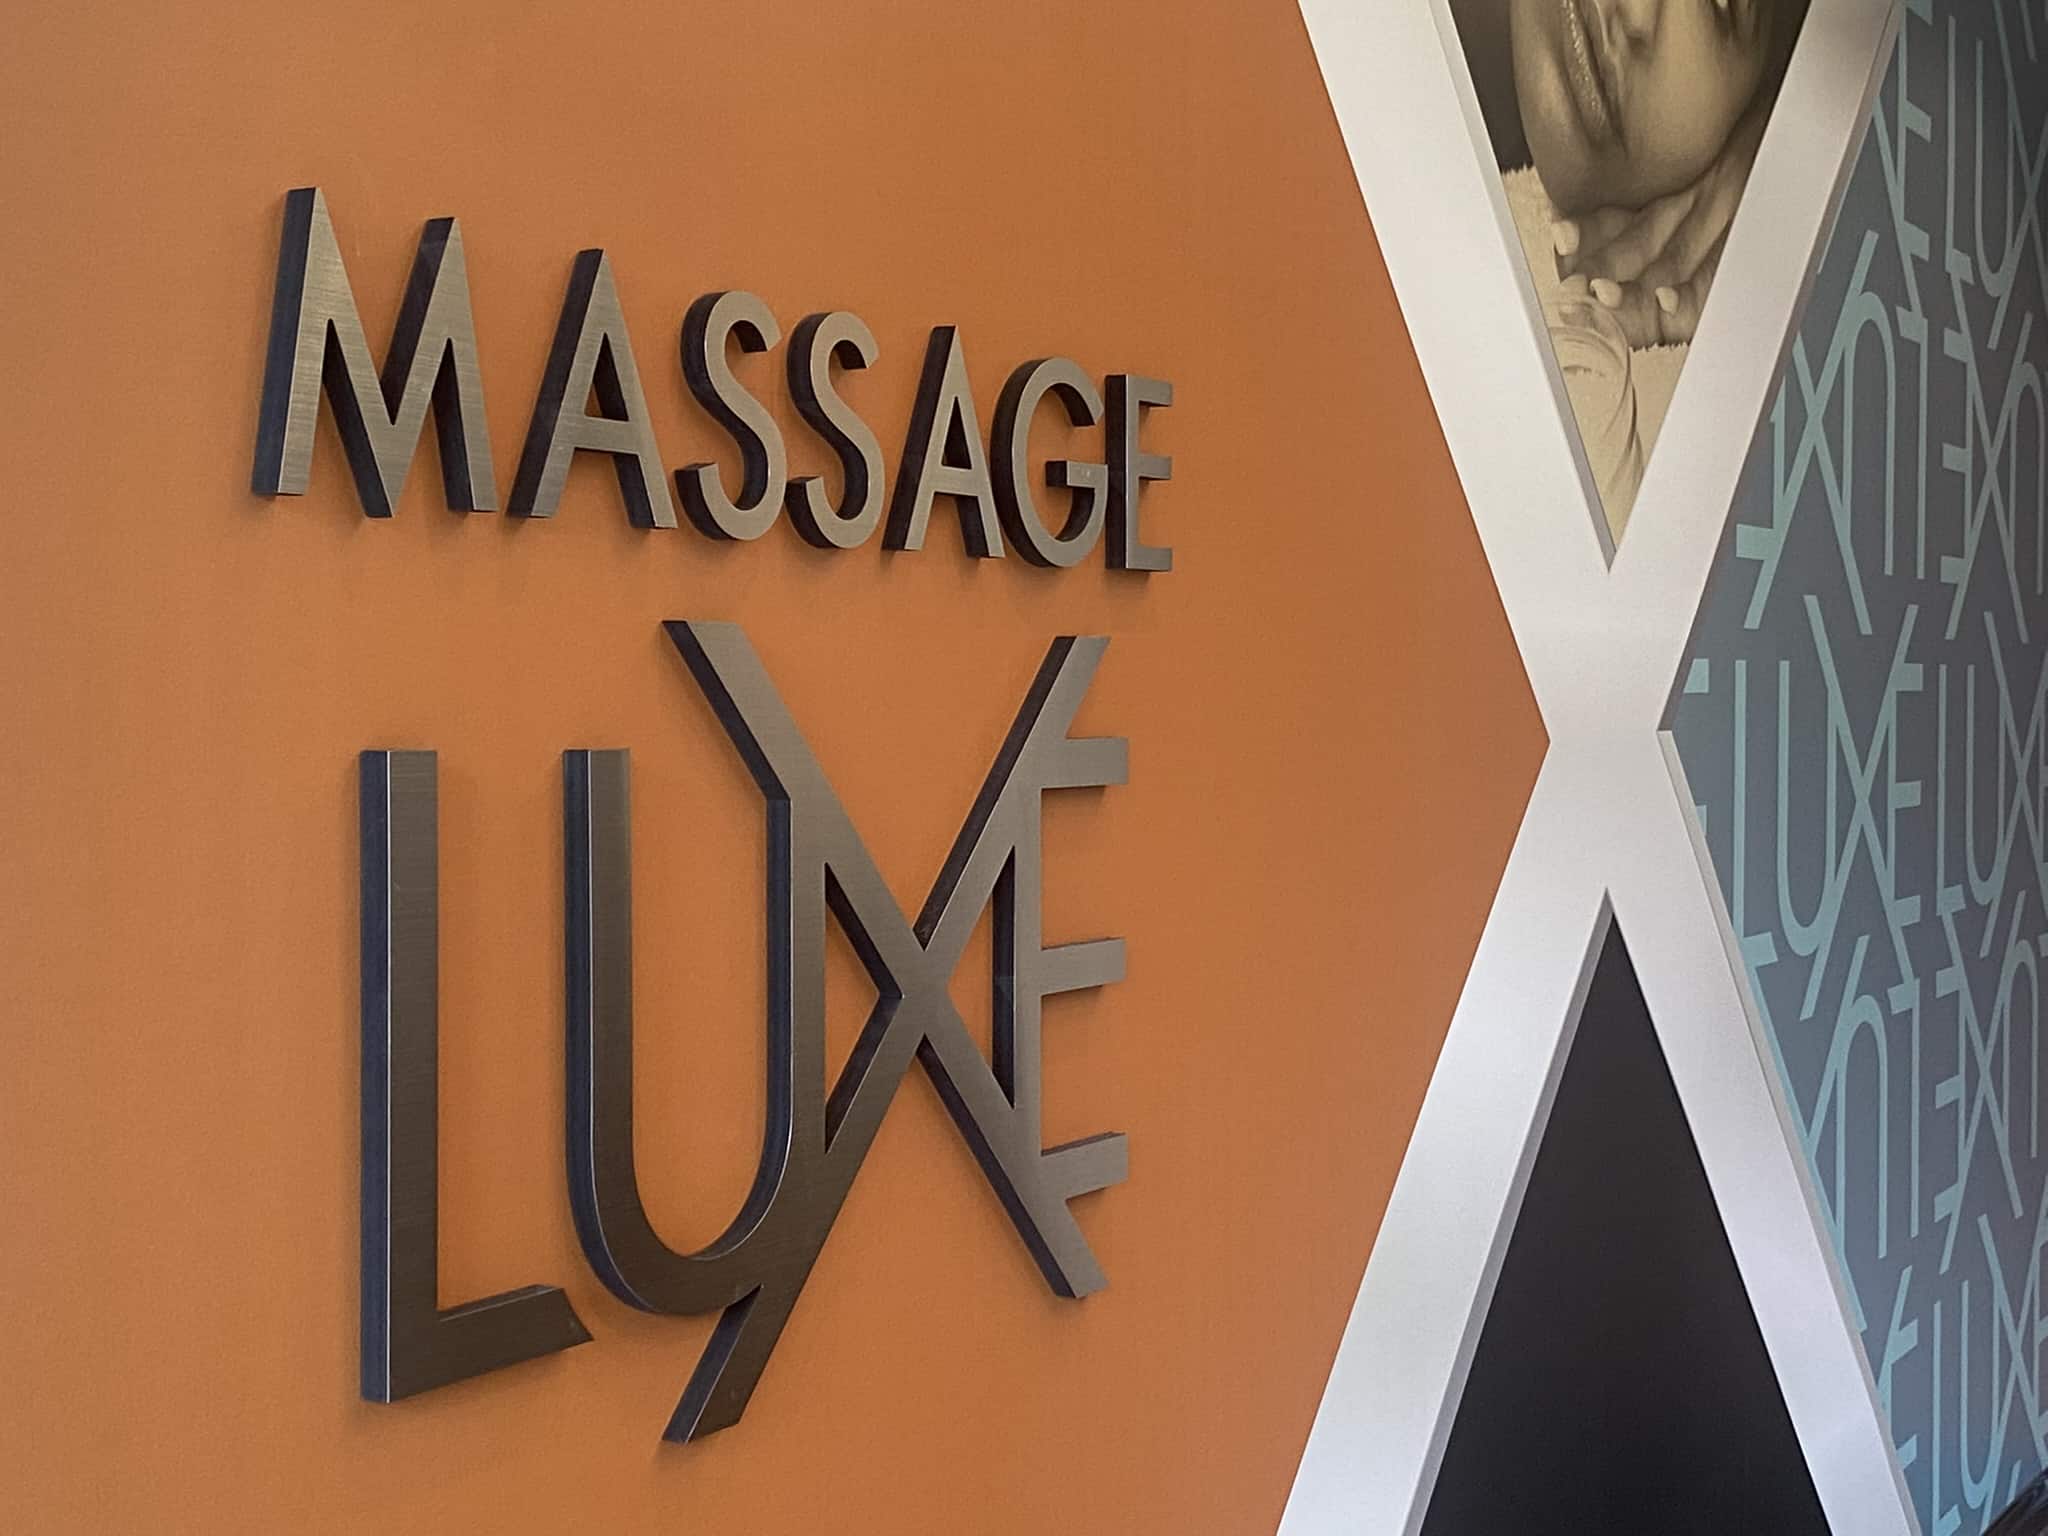 Custom POS System Gives MassageLuXe Franchisees an Edge